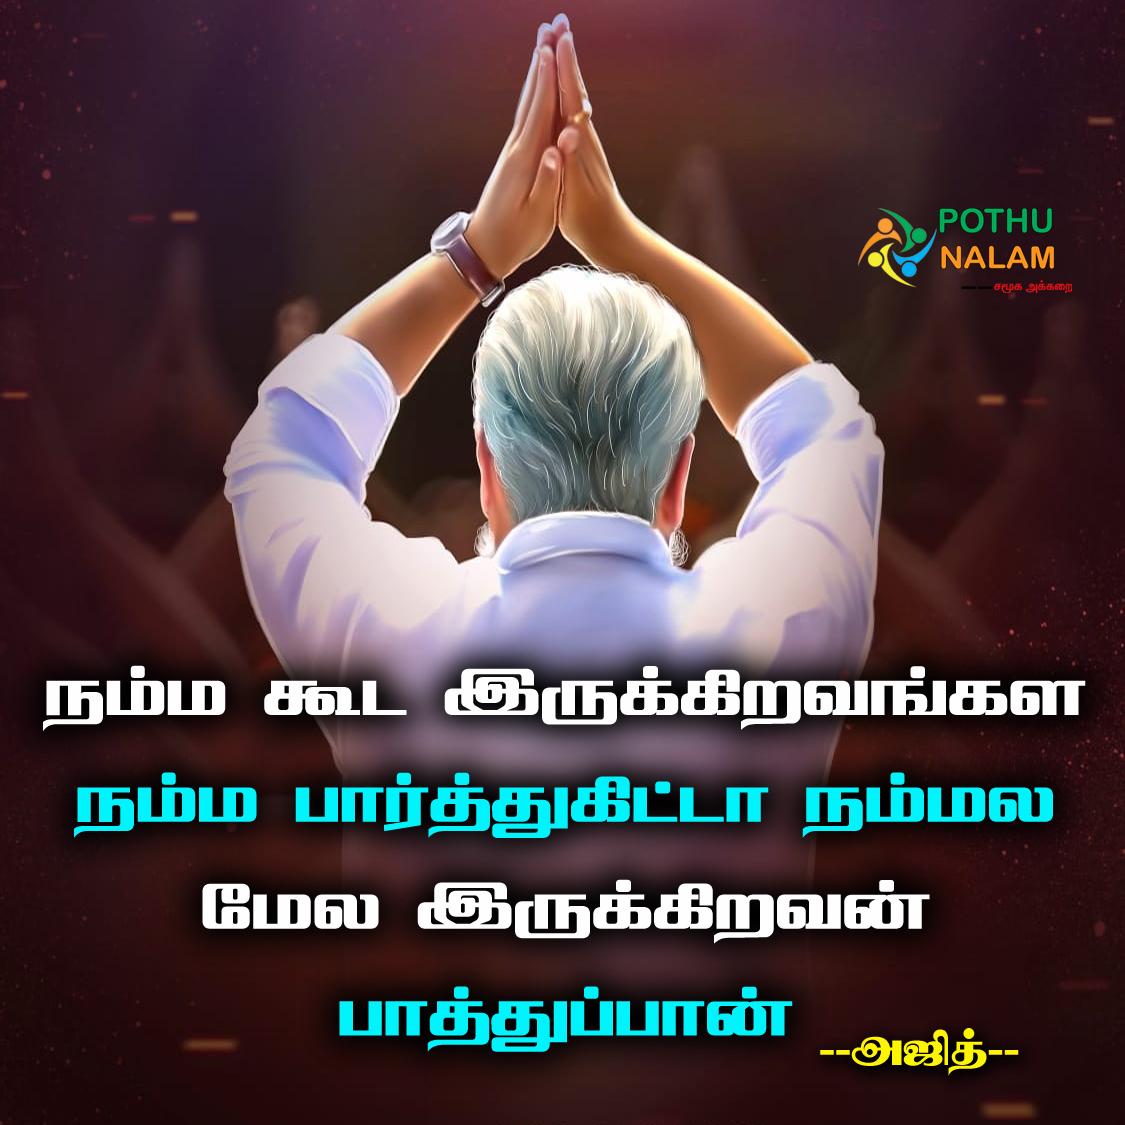  thala ajith quotes in tamil